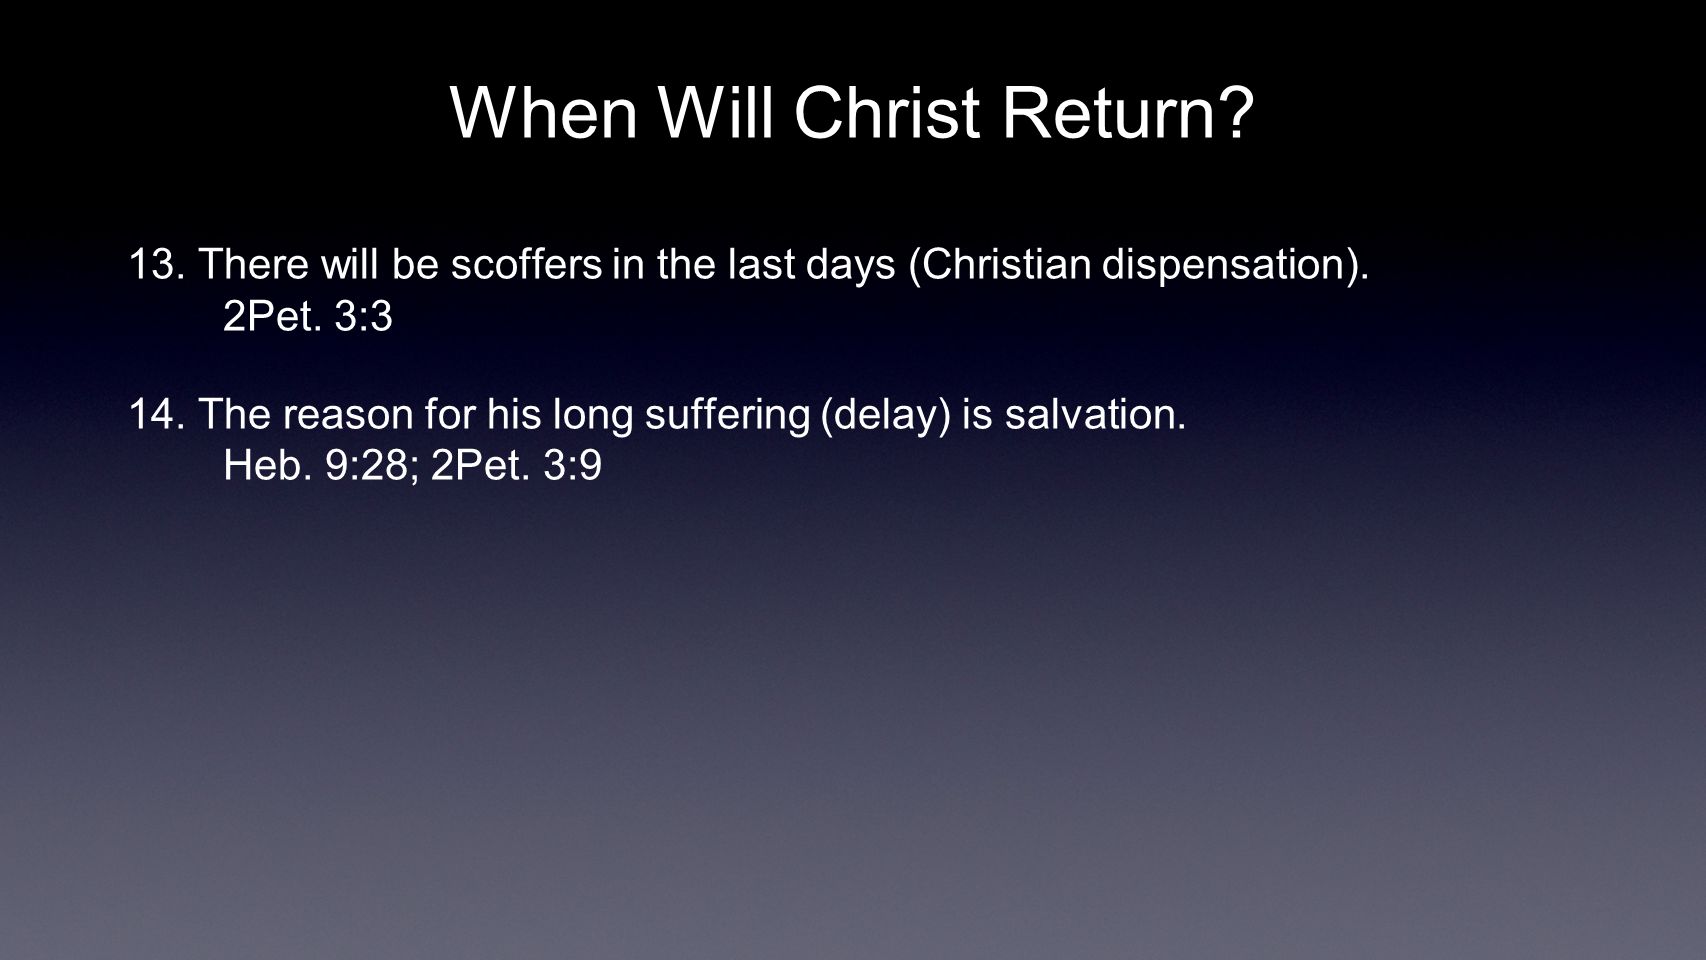 When Will Christ Return. 13. There will be scoffers in the last days (Christian dispensation).